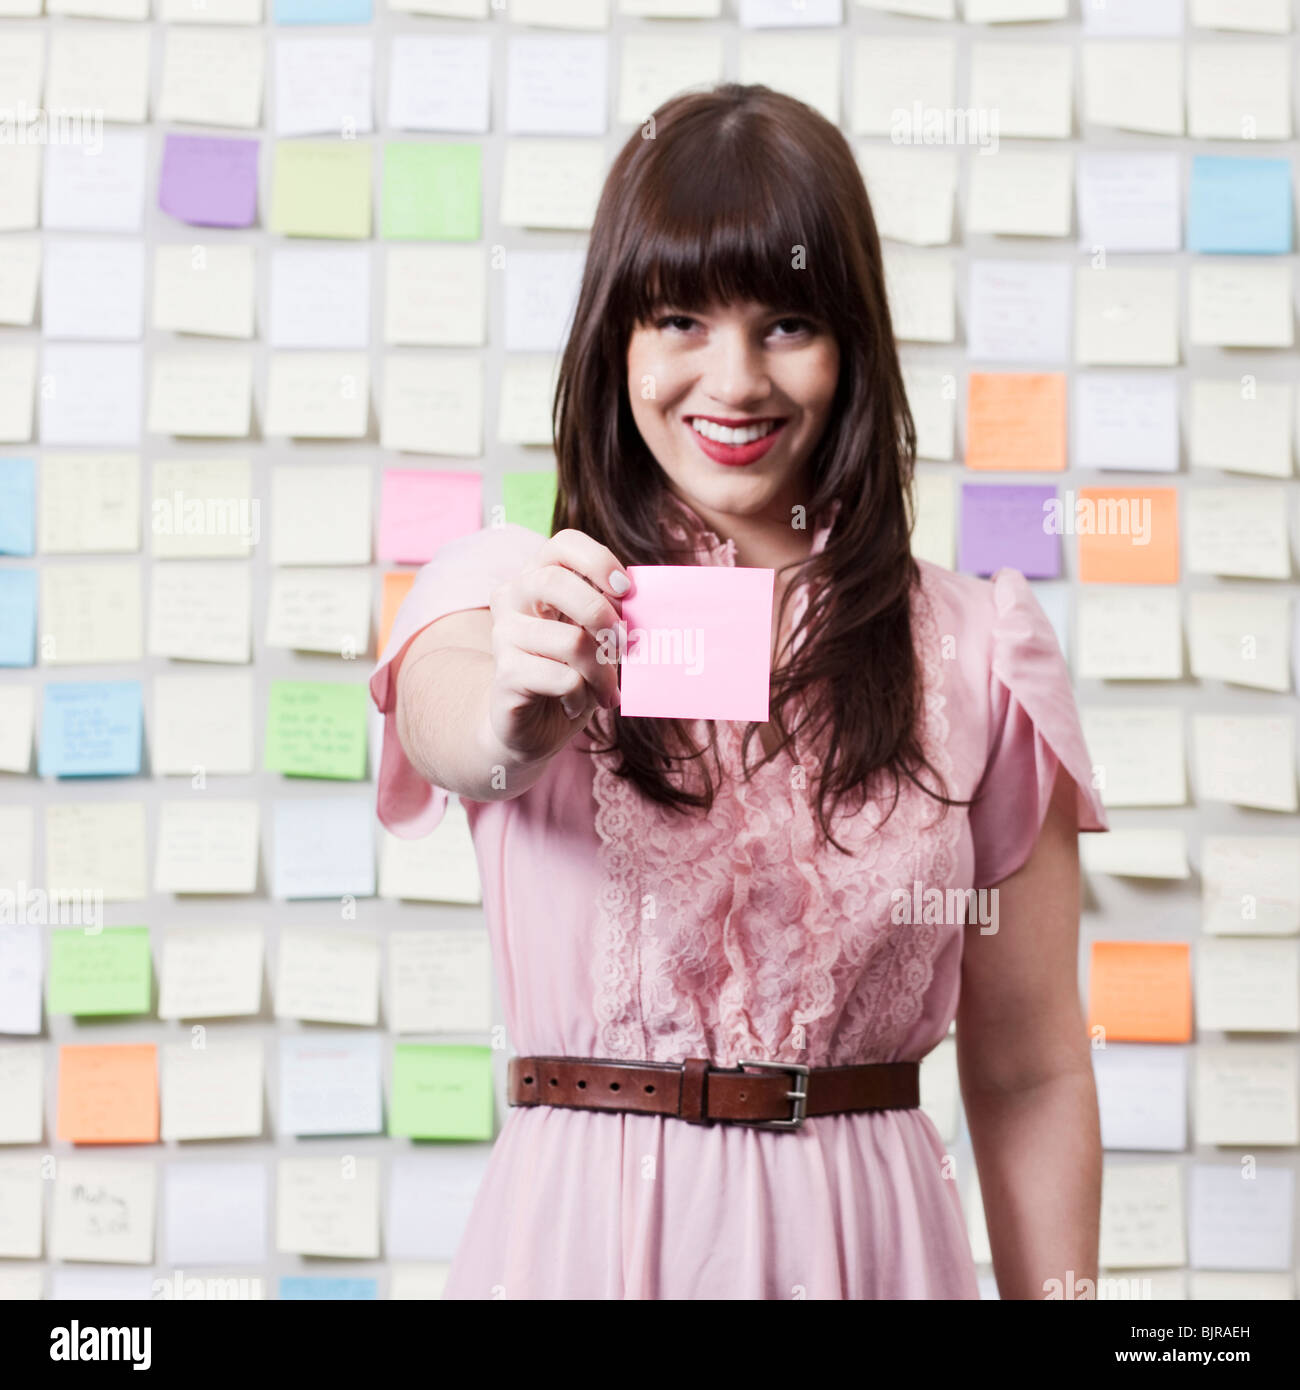 Portrait of young woman holding adhesive note Stock Photo